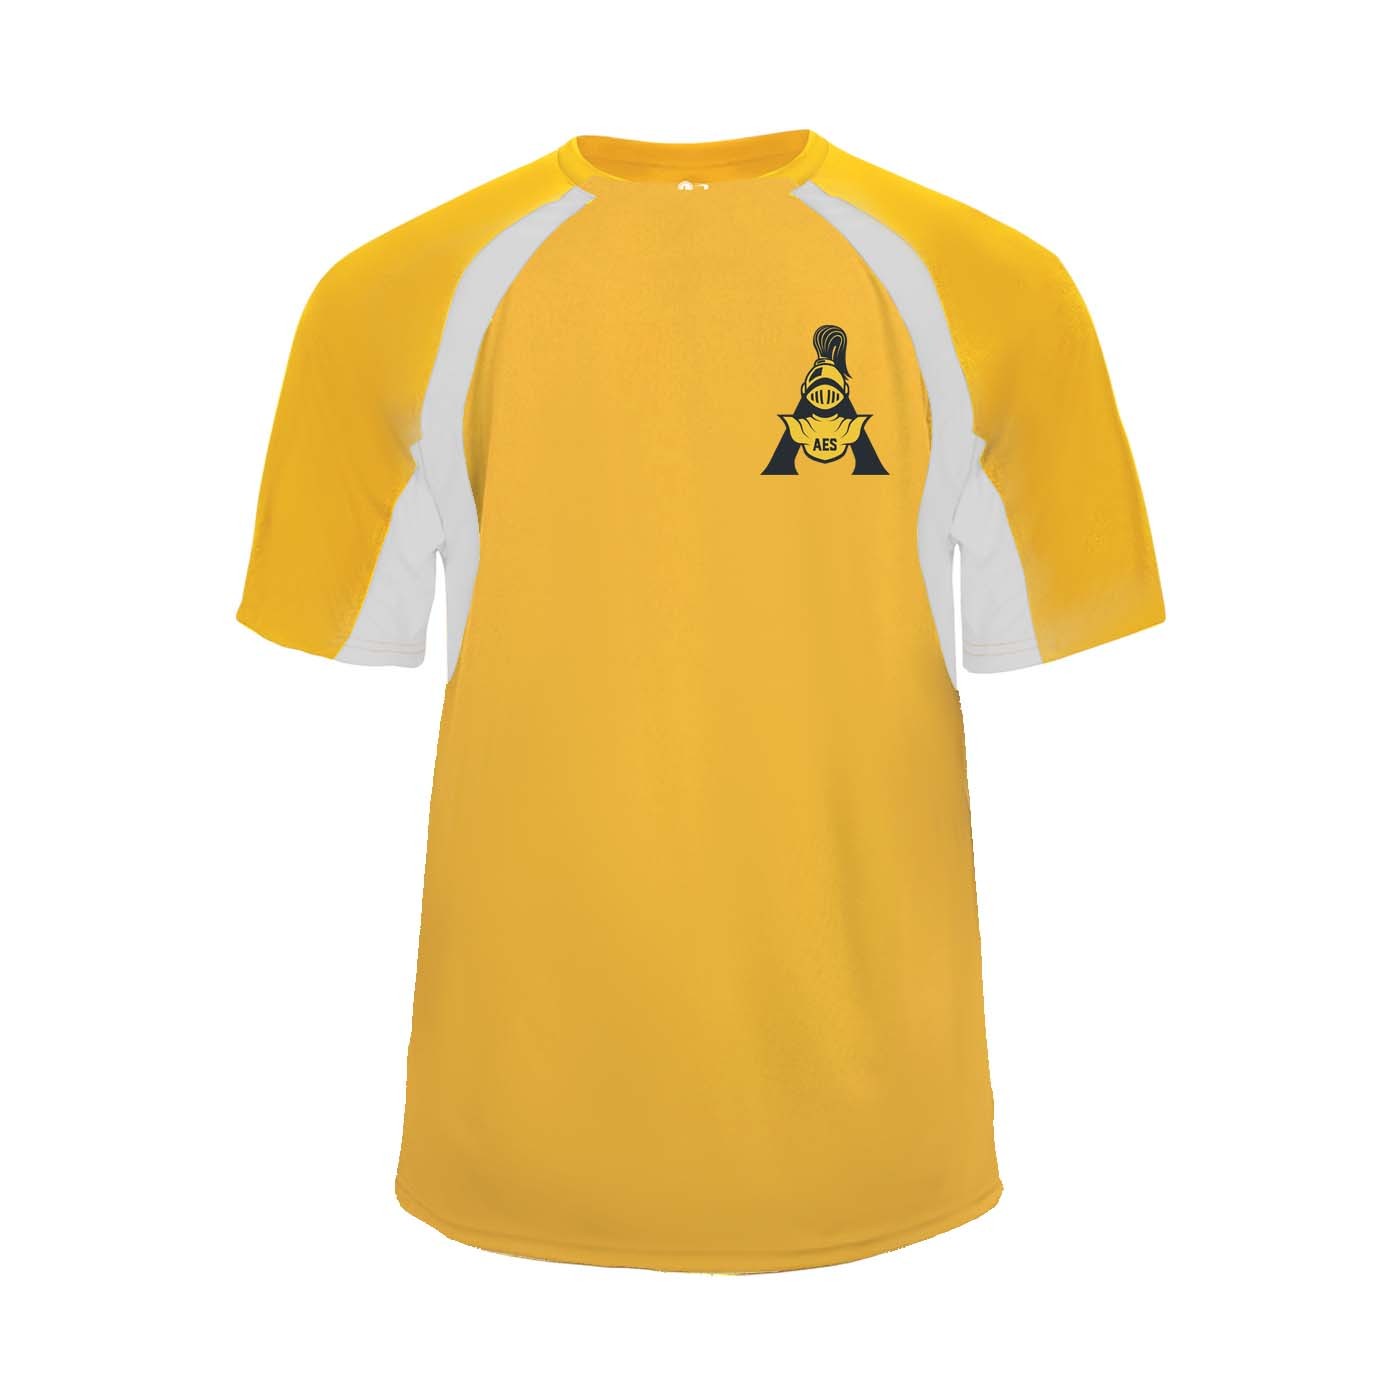 ANN Spirit Hook S/S T-Shirt w/ AES Logo - Please Allow 2-3 Weeks for Delivery